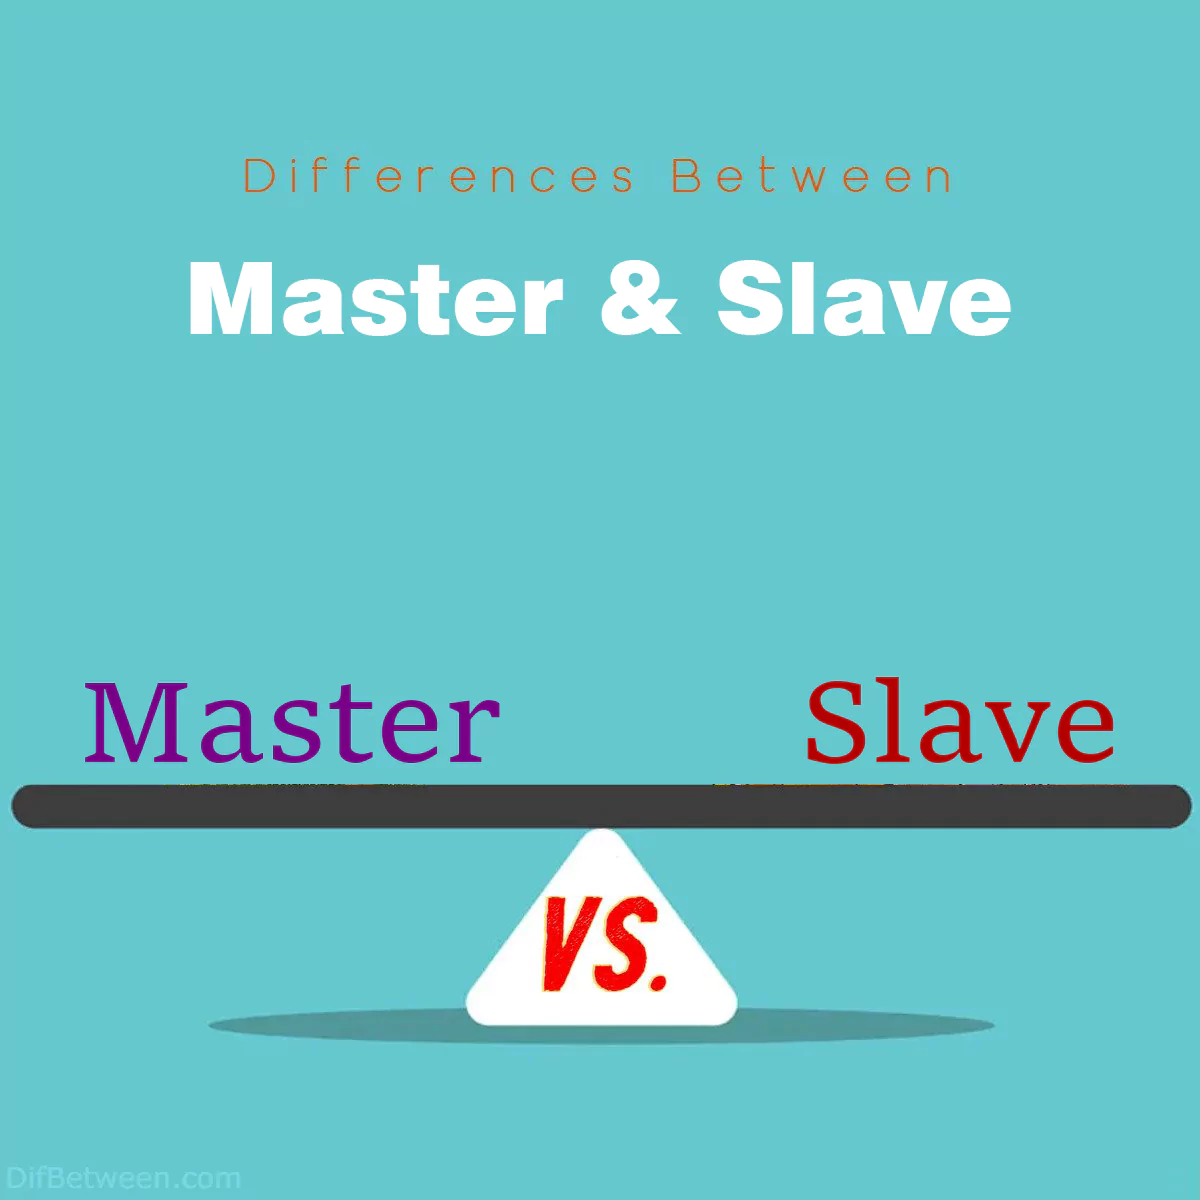 Differences Between Master and Slave